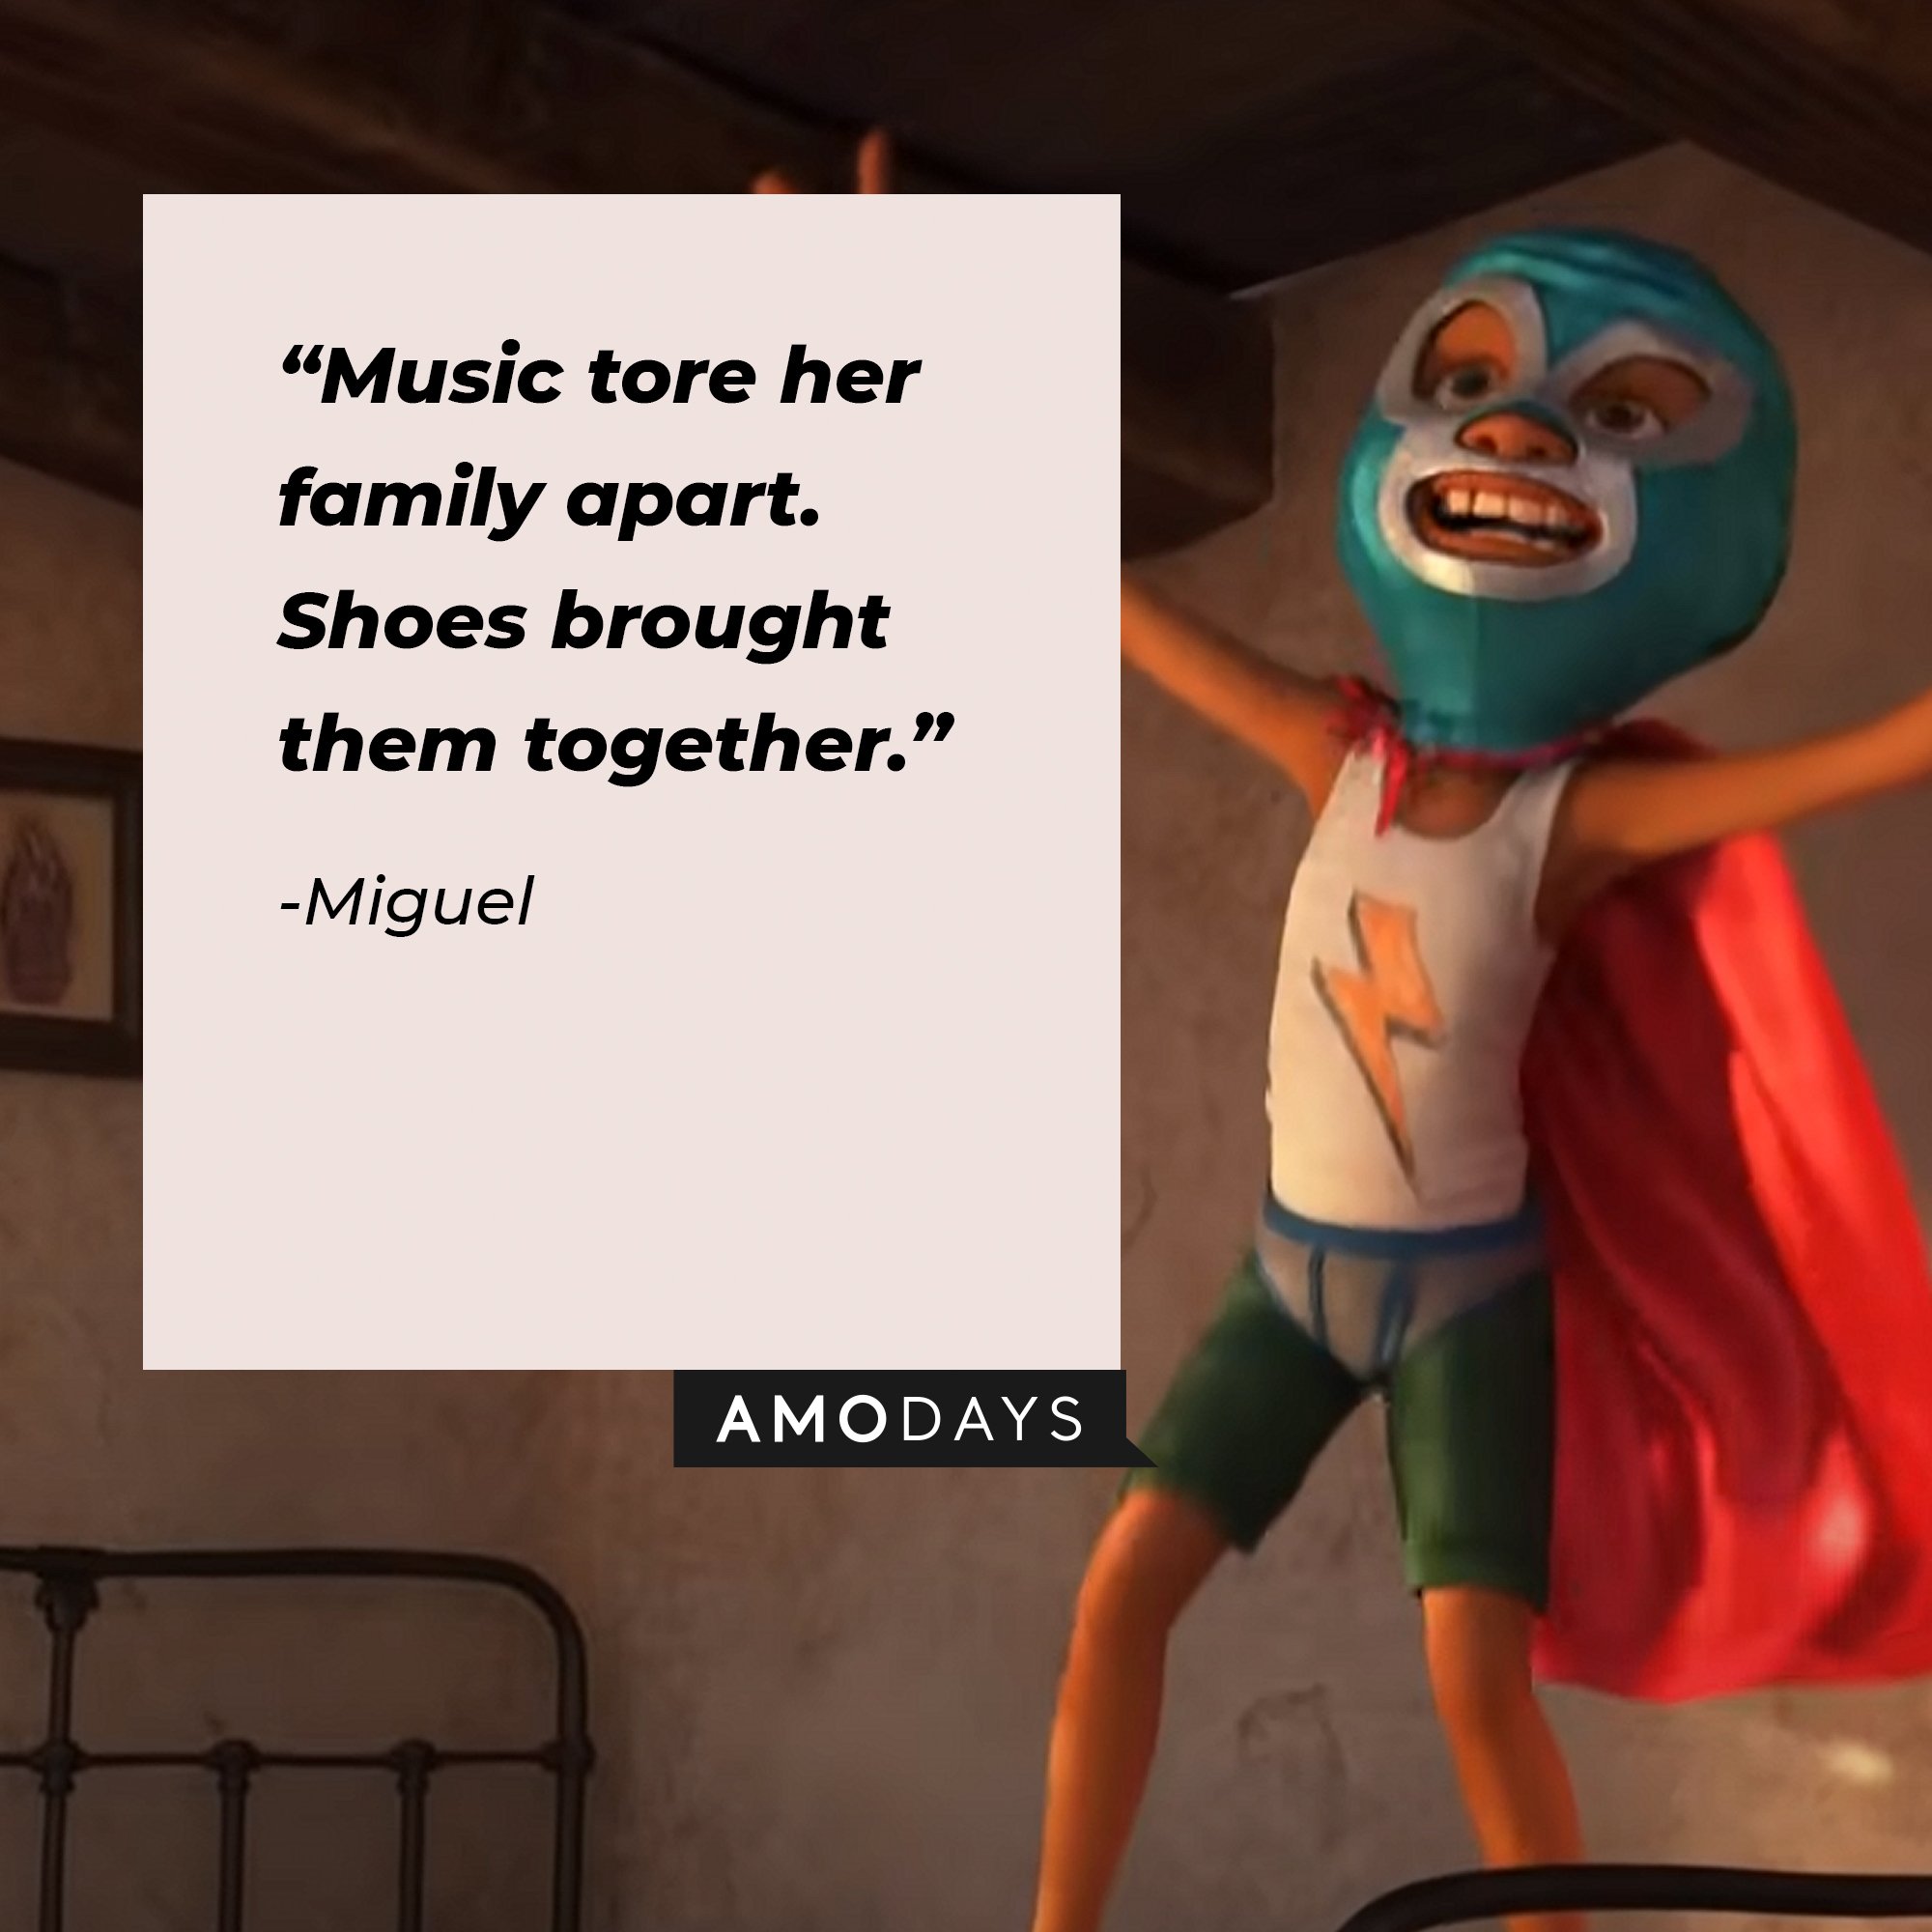 Miguel's quote: “Music tore her family apart. Shoes brought them together.” | Image: AmoDays